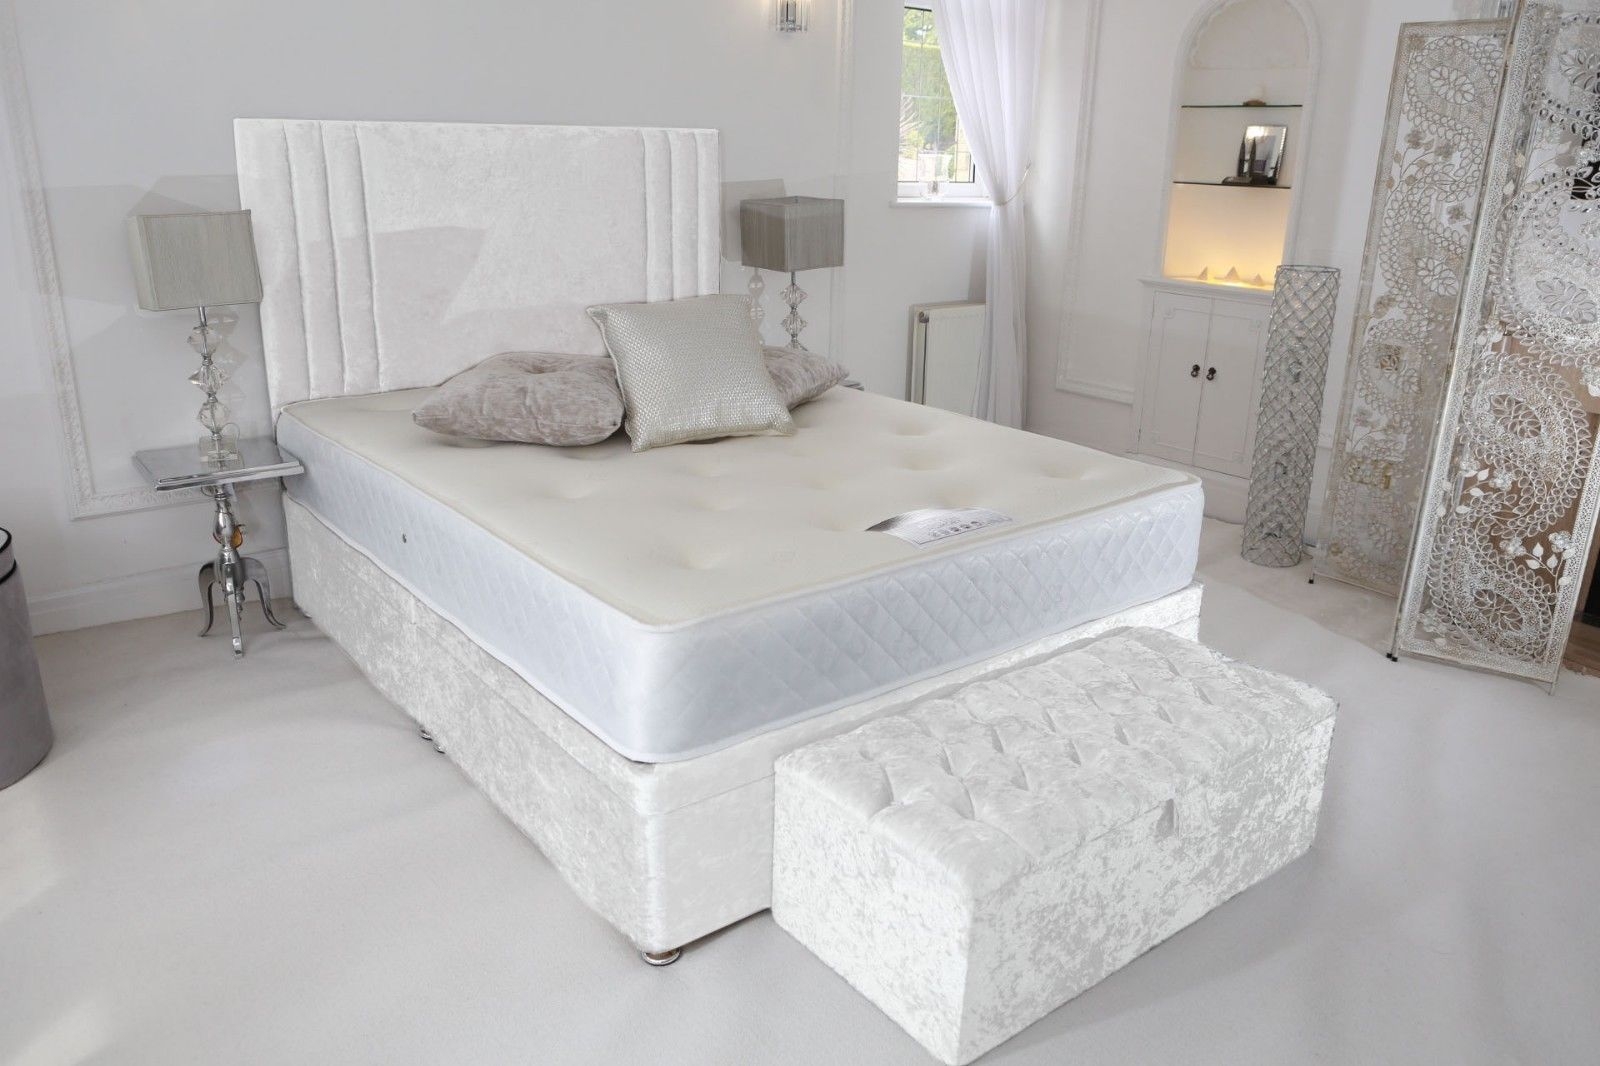 Crushed Velvet Divan Bed – White – Single, Small Double, Double, King & Super King Sizes Available – Headboard & Mattress Included